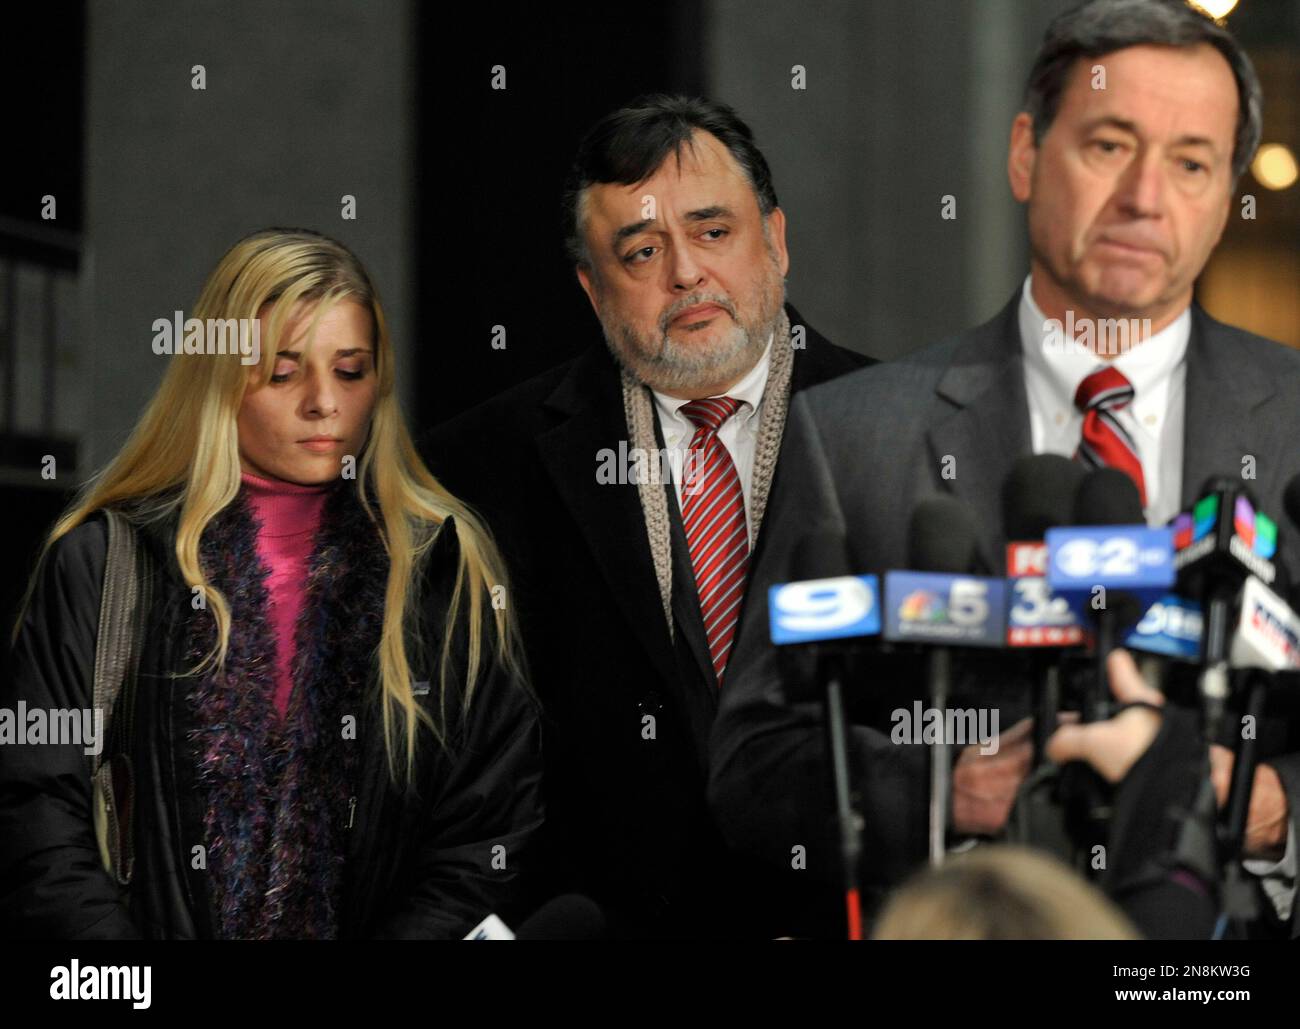 Bartender Karolina Obrycka, left, listens while her attorney Terry Ekl, right, speaks during a news conference in Chicago on Tuesday, Nov. 13, 2012. Jurors awarded $850,000 in damages to Obrycka, who was beaten in February 2007 by off-duty Chicago police officer Anthony Abbate, who was admittedly drunk at the time. Surveillance video of the hulking Abbate pushing Obrycka to the ground behind the bar at Jesse's Shortstop Inn, then repeatedly punching and kicking her went viral online. (AP Photo/Paul Beaty) Stock Photo